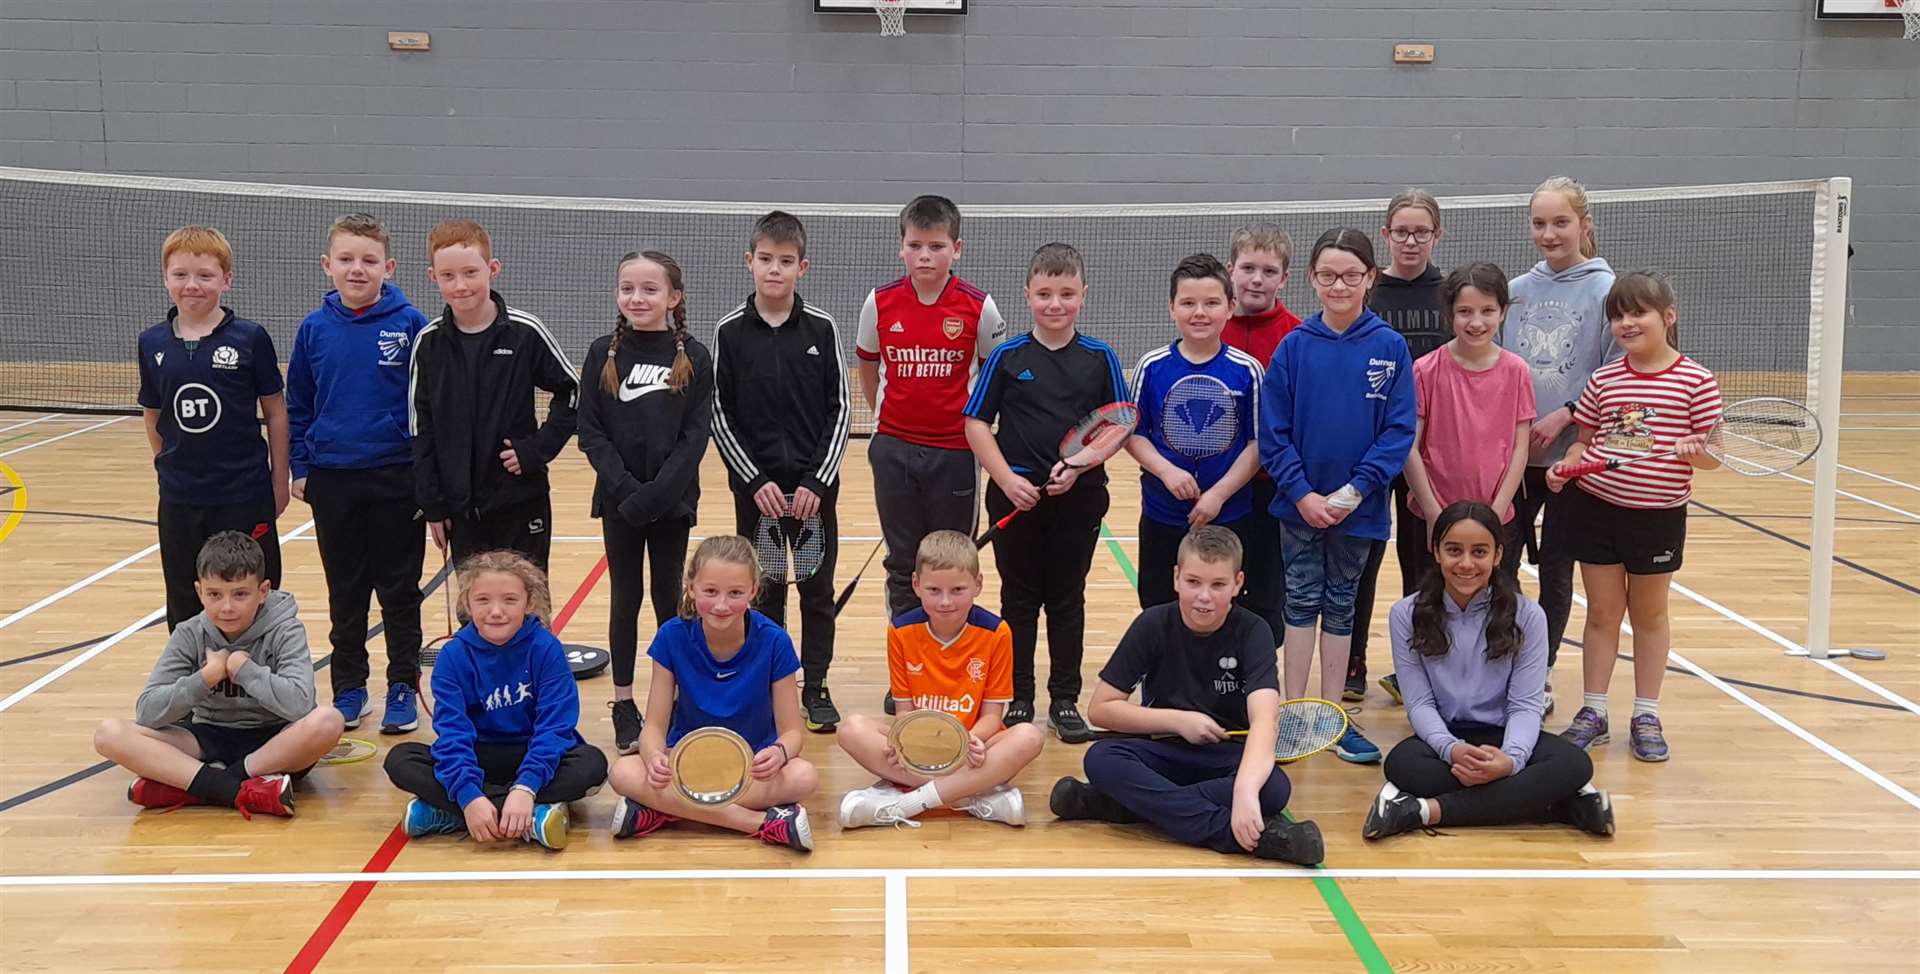 All the competitors in Caithness Badminton Association's under-11 championships held in Wick.